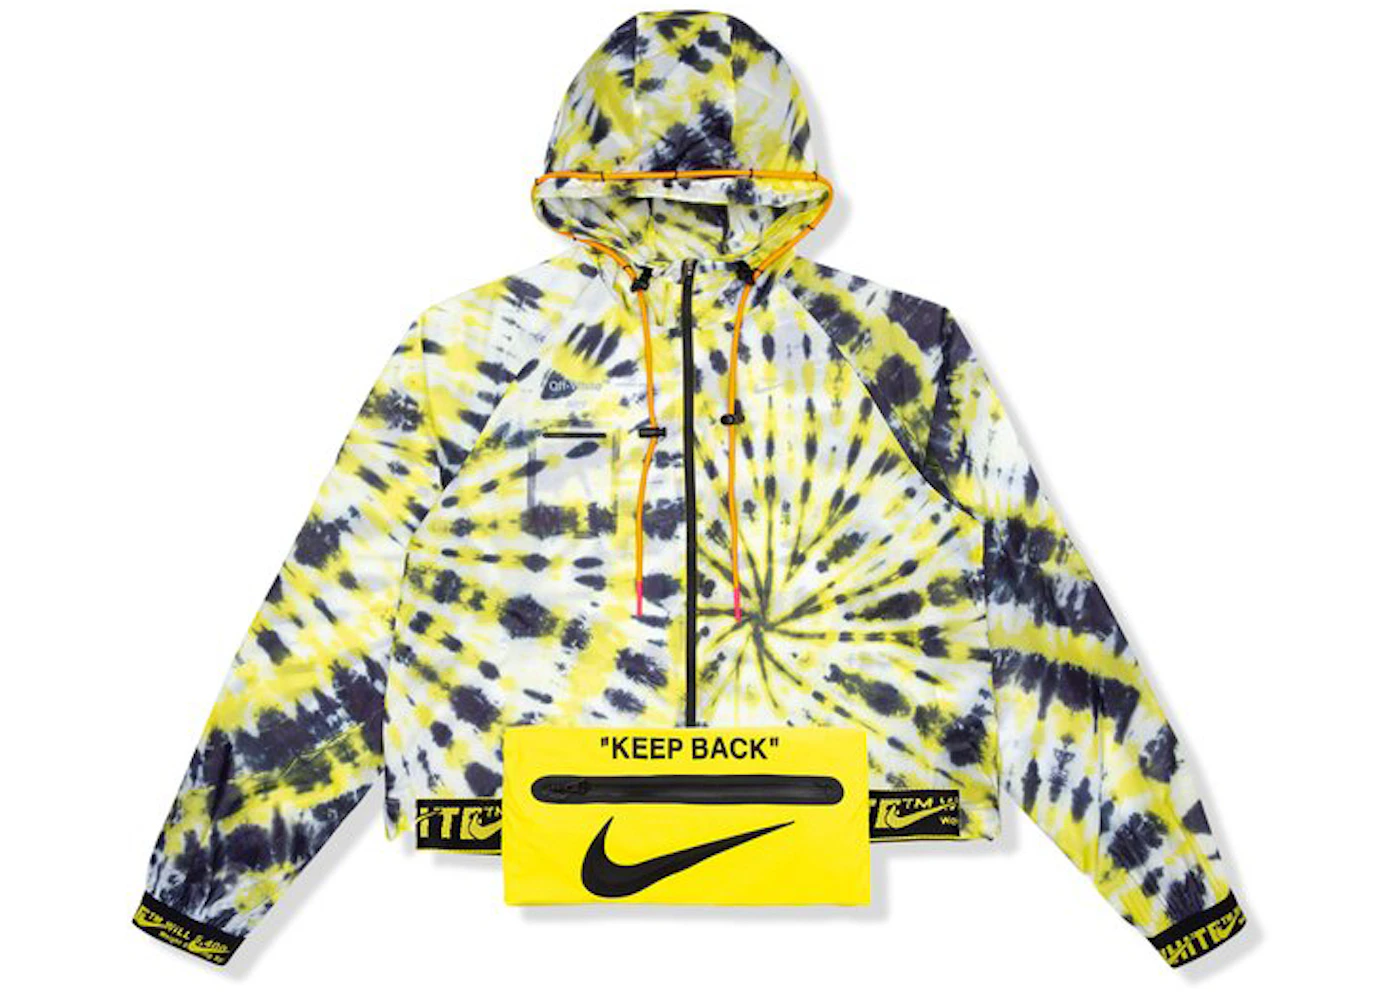 Vacant specify reel OFF-WHITE x Nike Women's NRG AOP Jacket Volt - FW19 - US